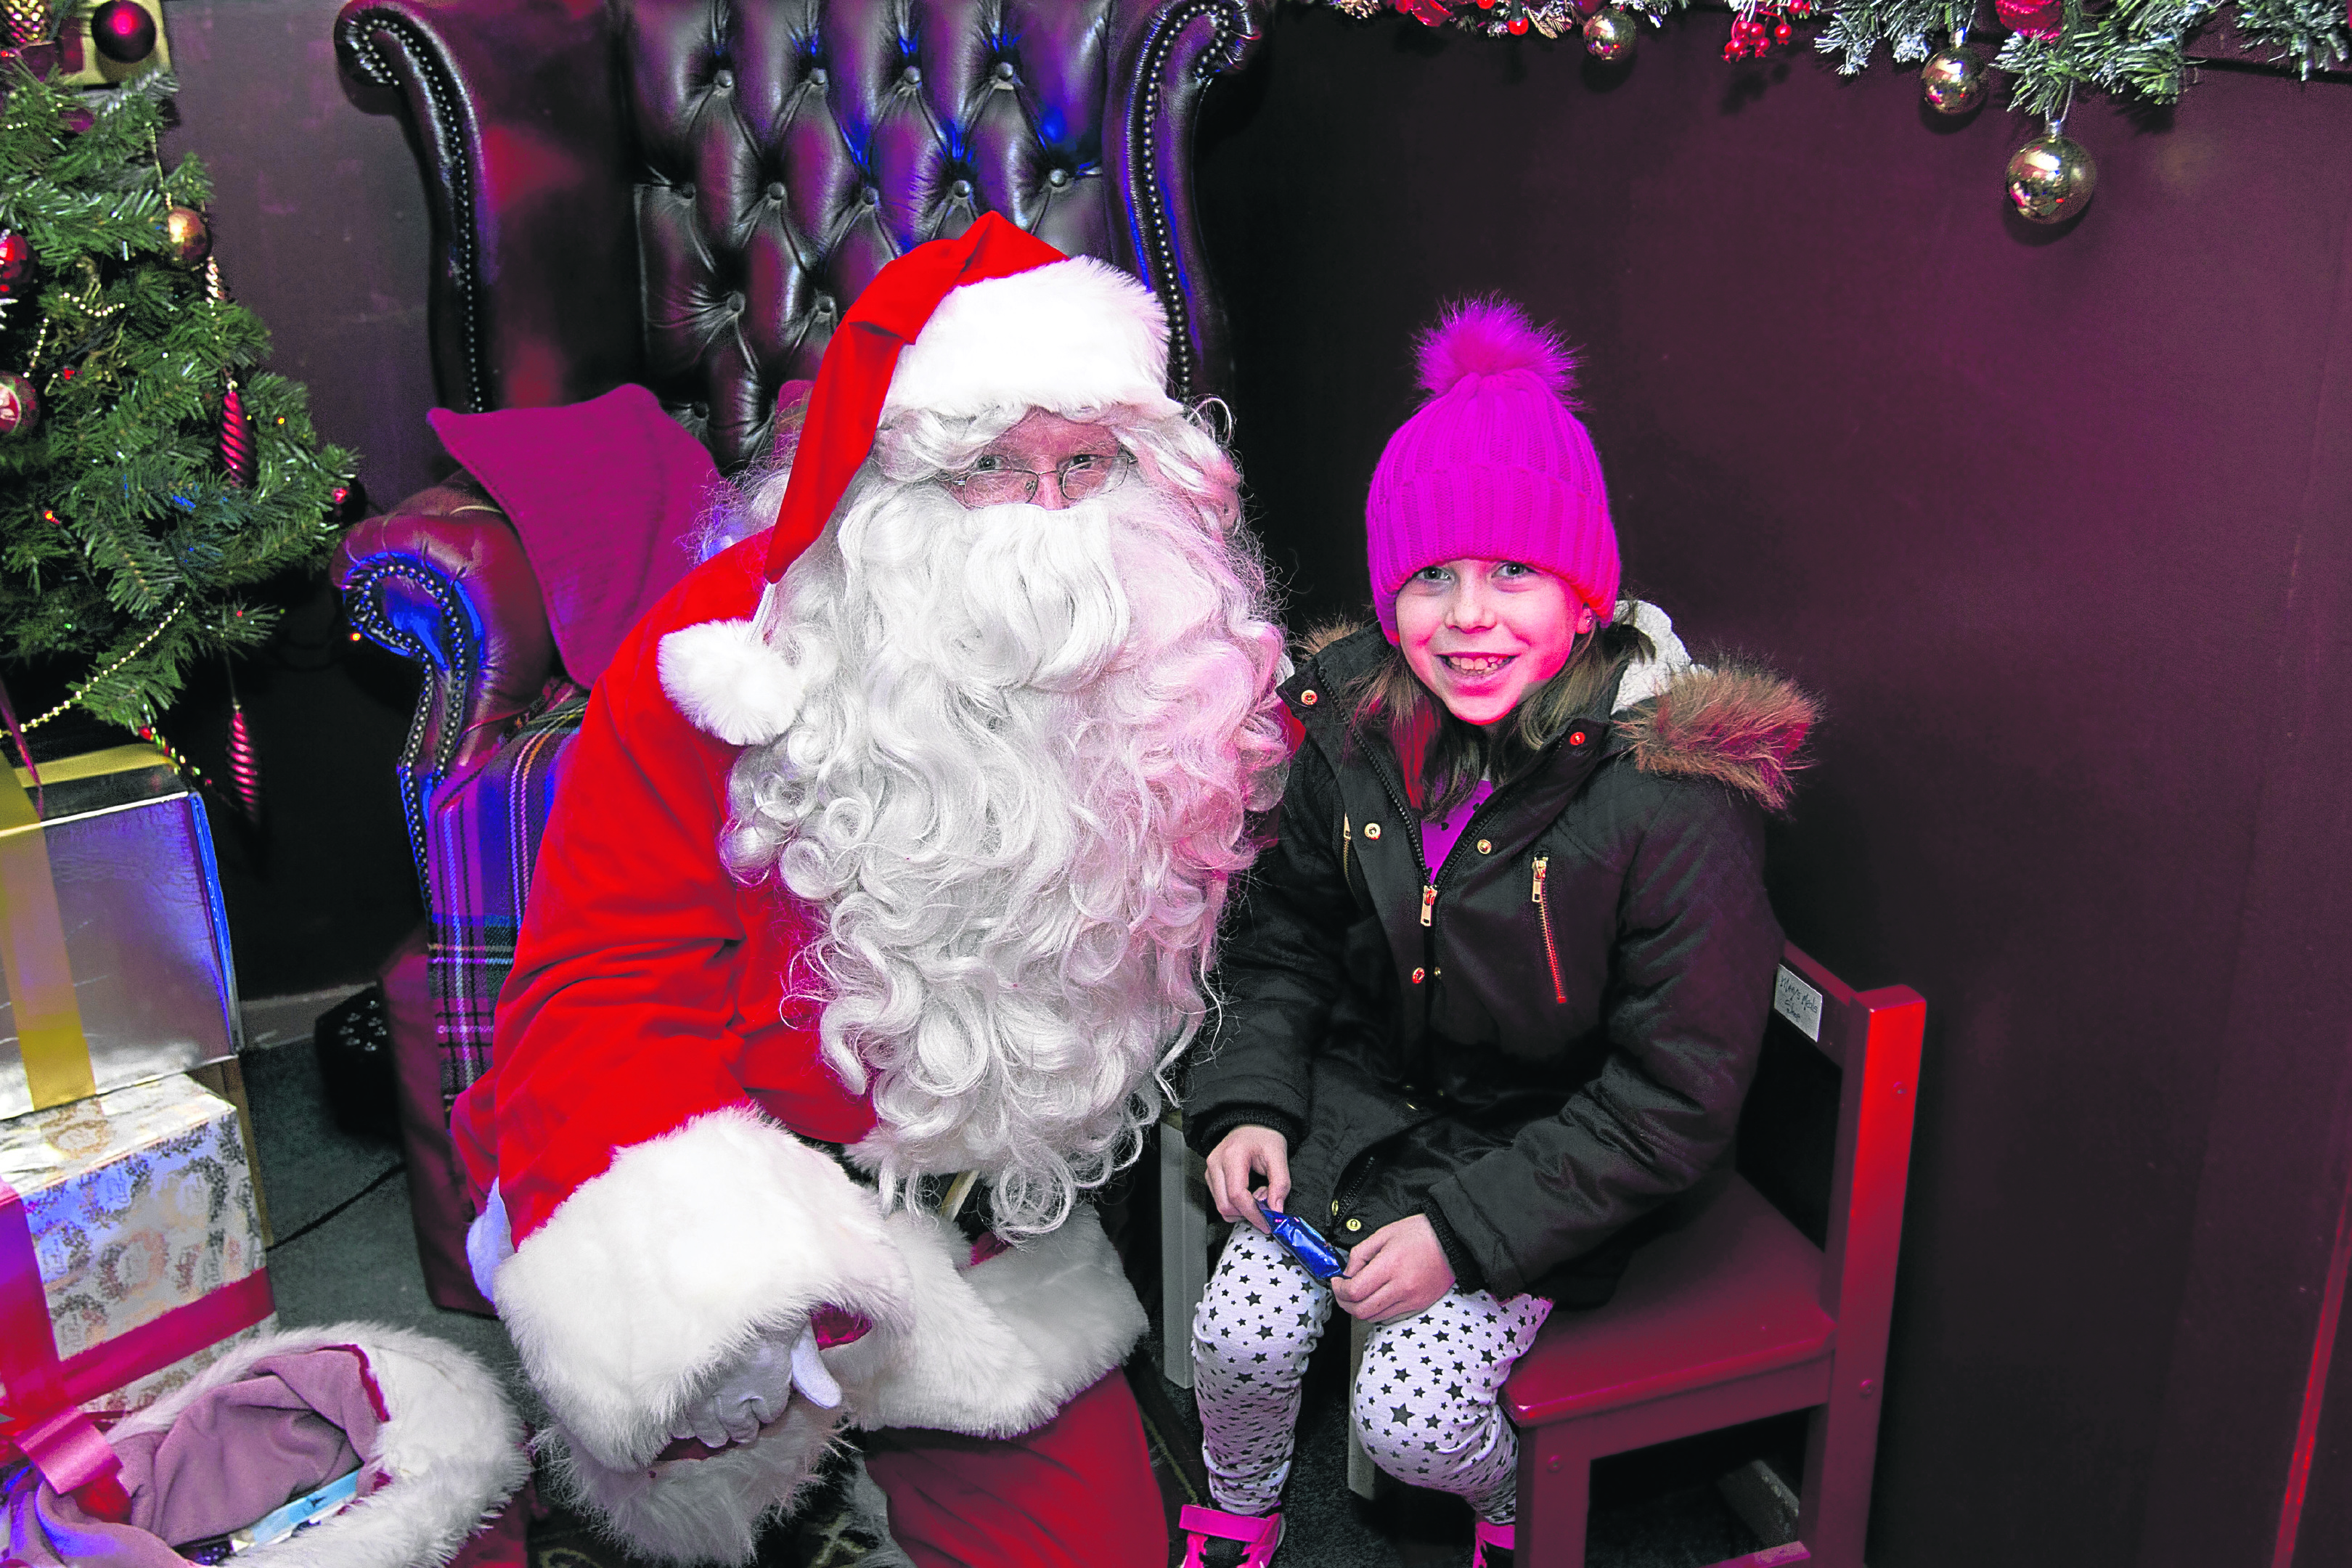 Young Jennifer Campbell Rockfield delivers her gift to santa for homeless and needy children.